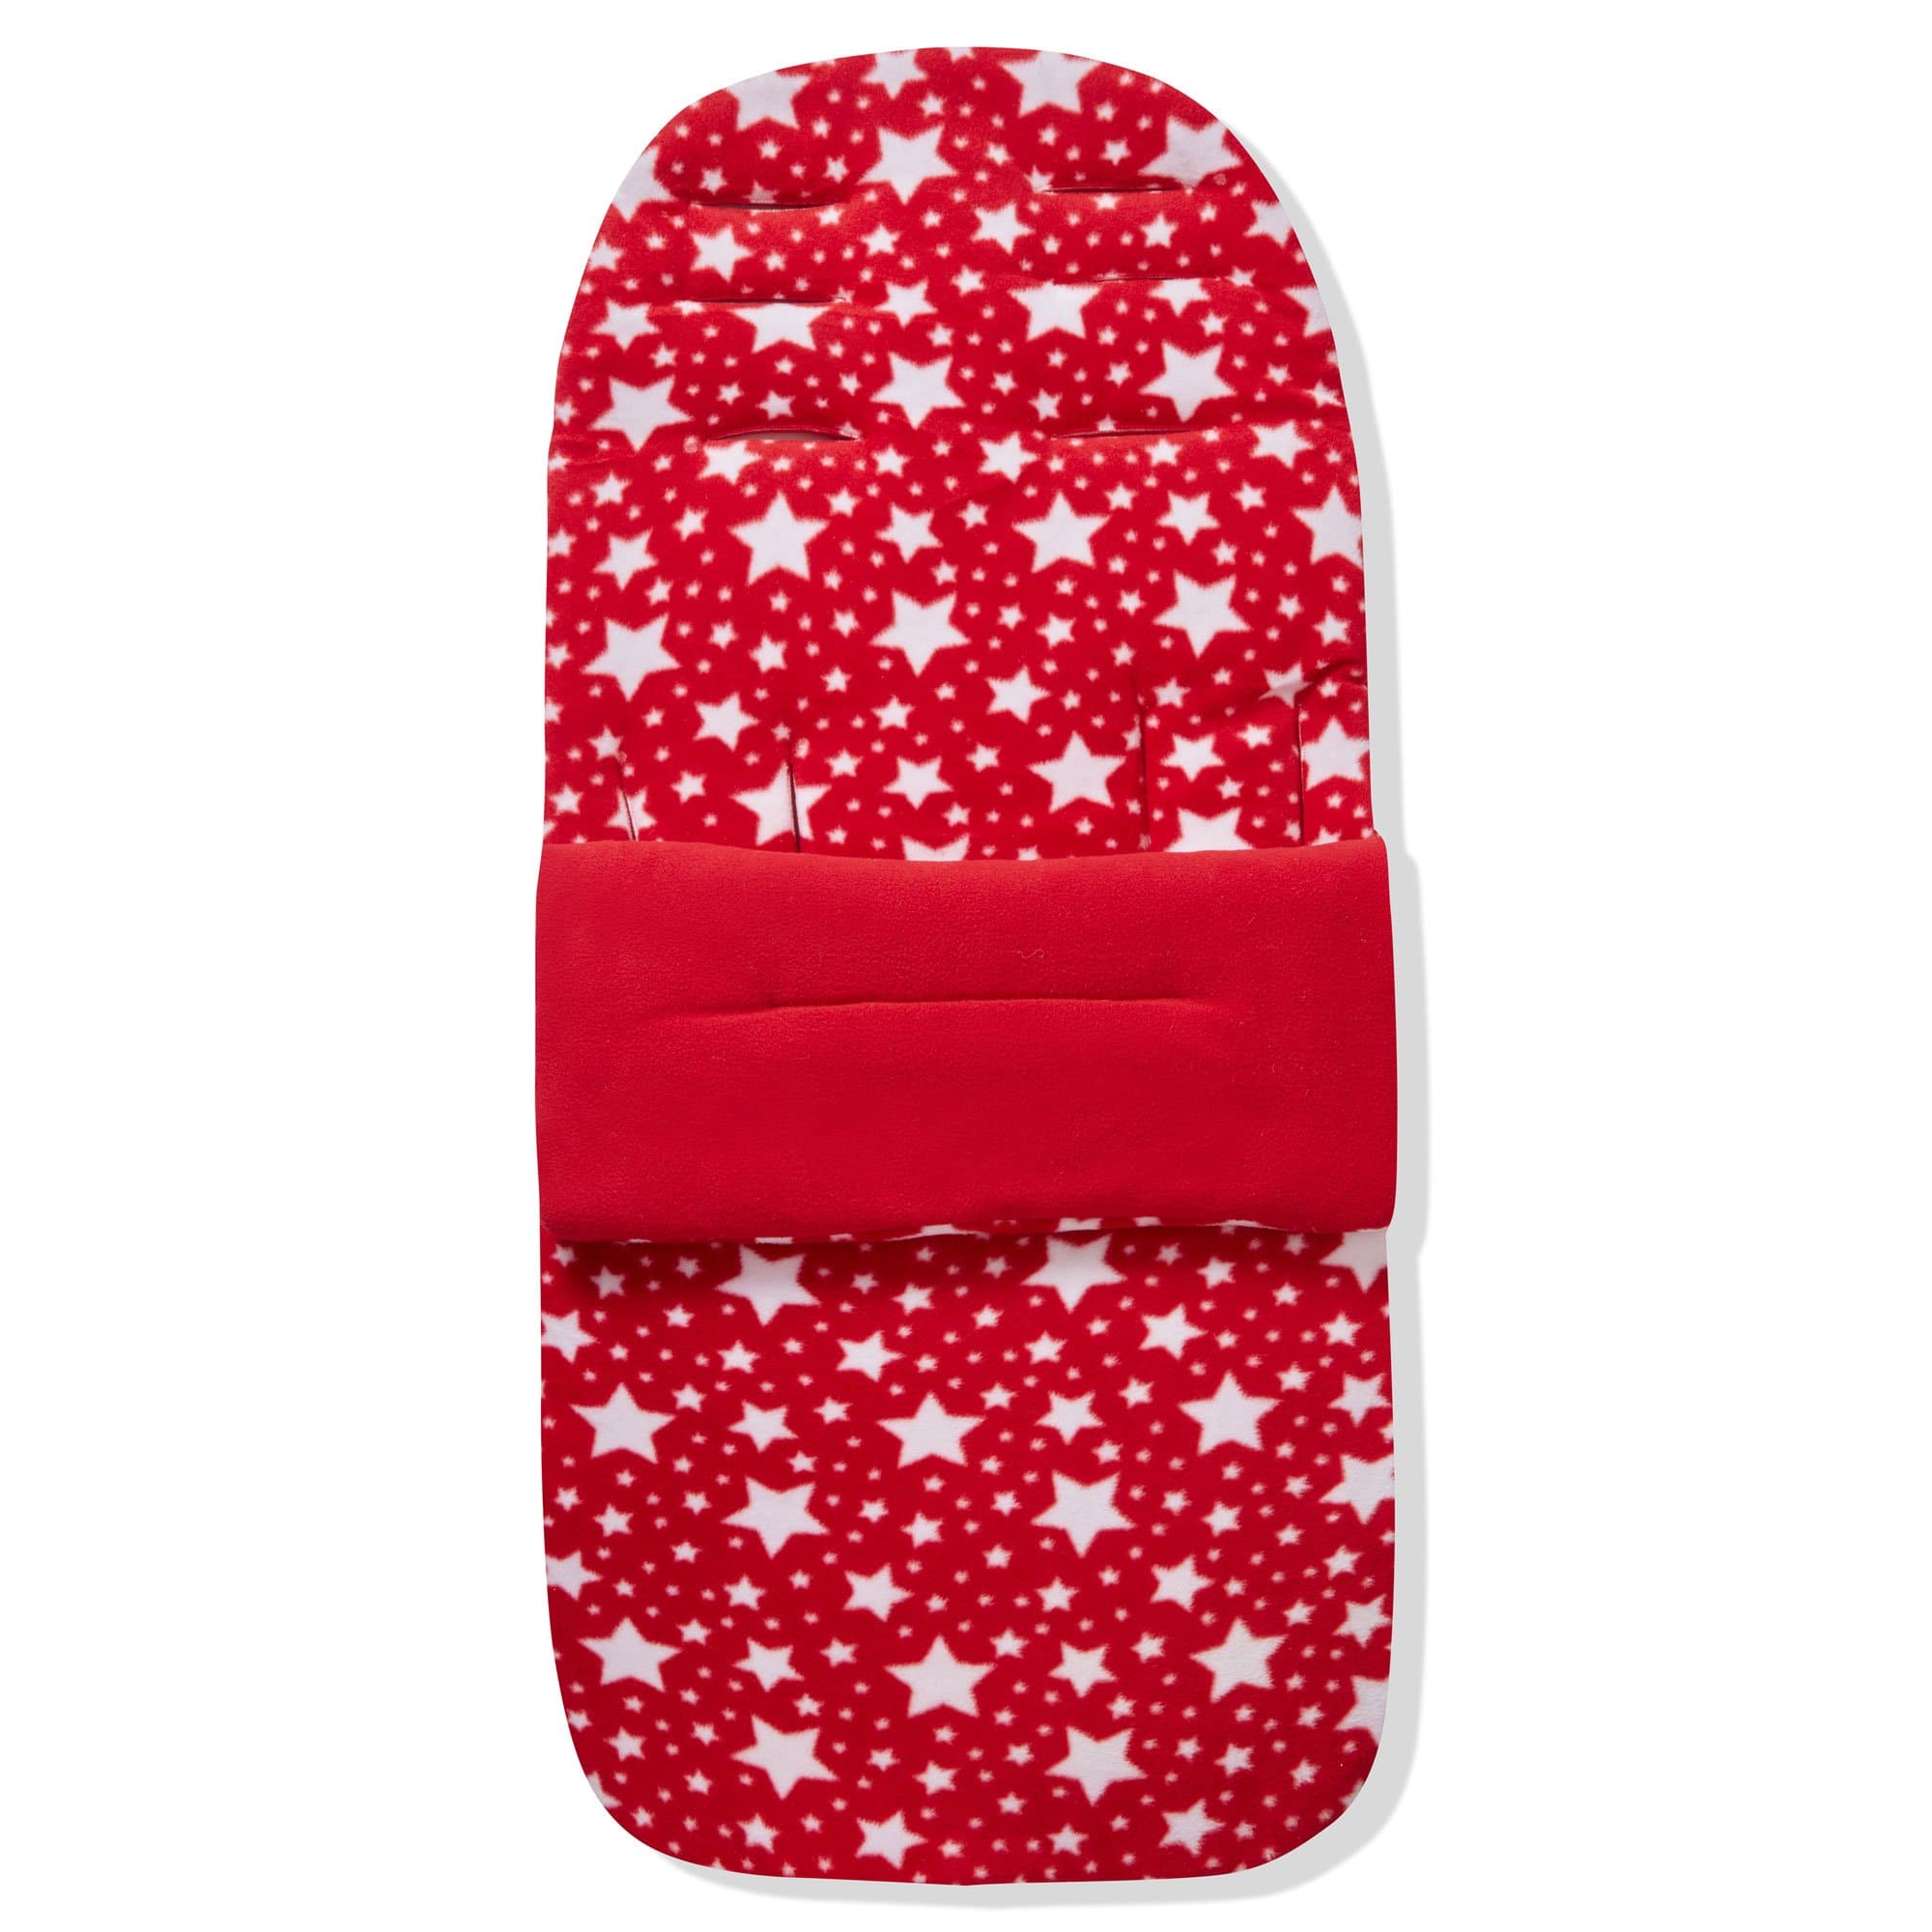 Fleece Footmuff / Cosy Toes Compatible with Mima - Red Star / Fits All Models | For Your Little One